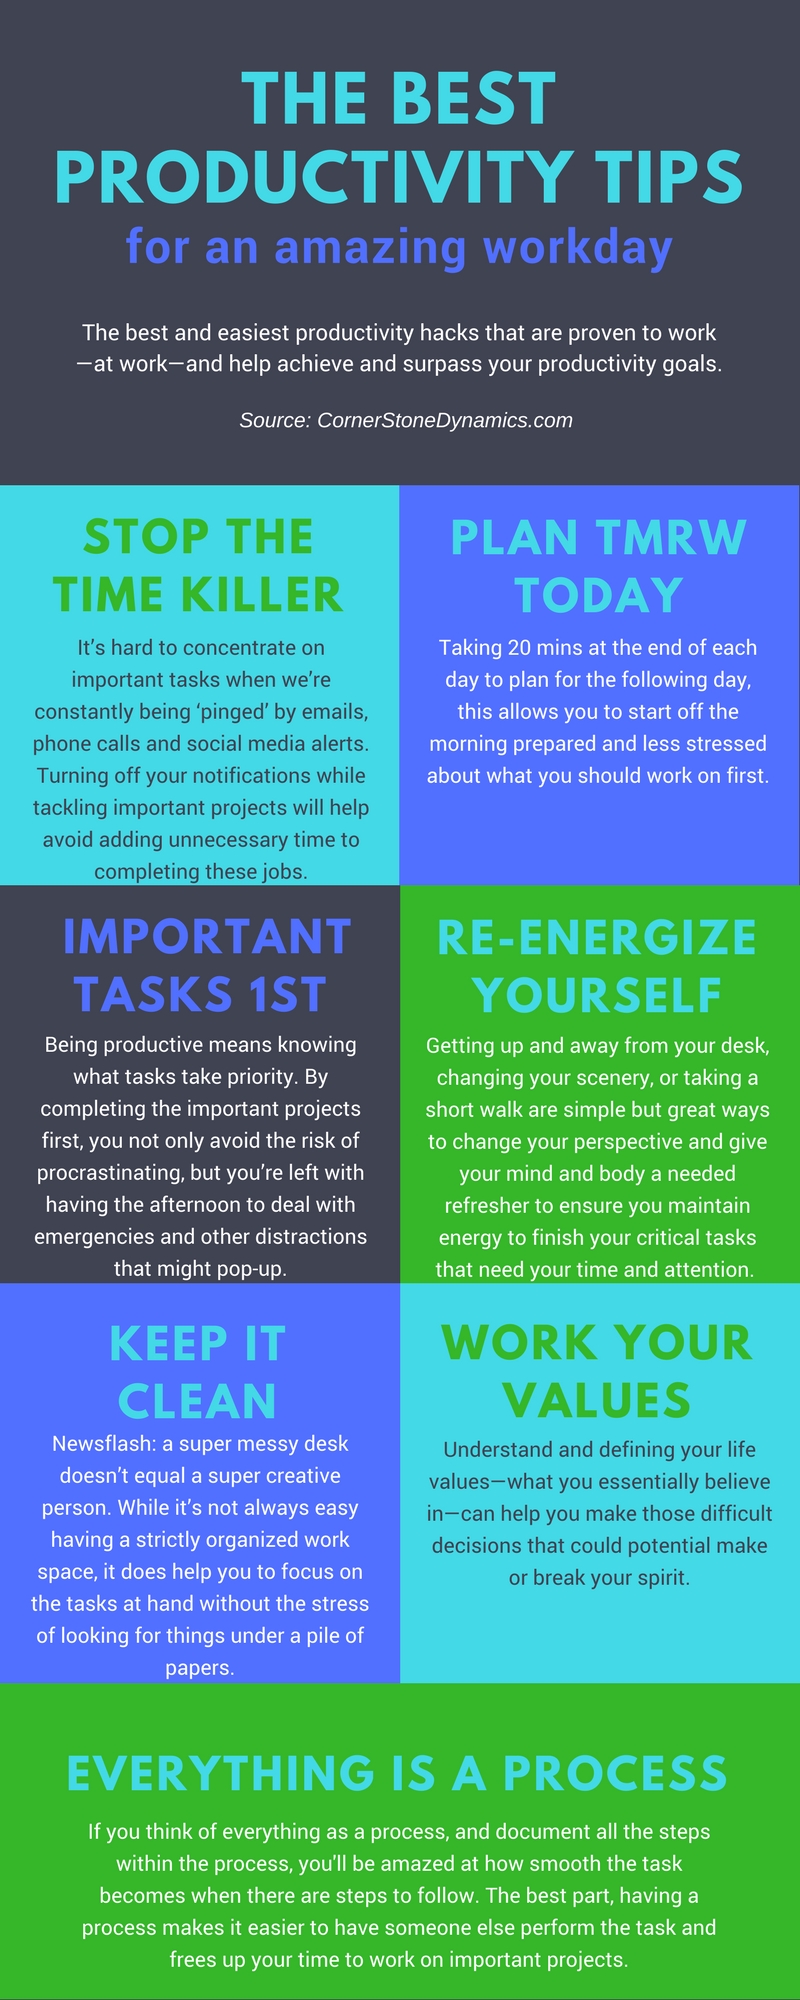 the best productivity tips infographic